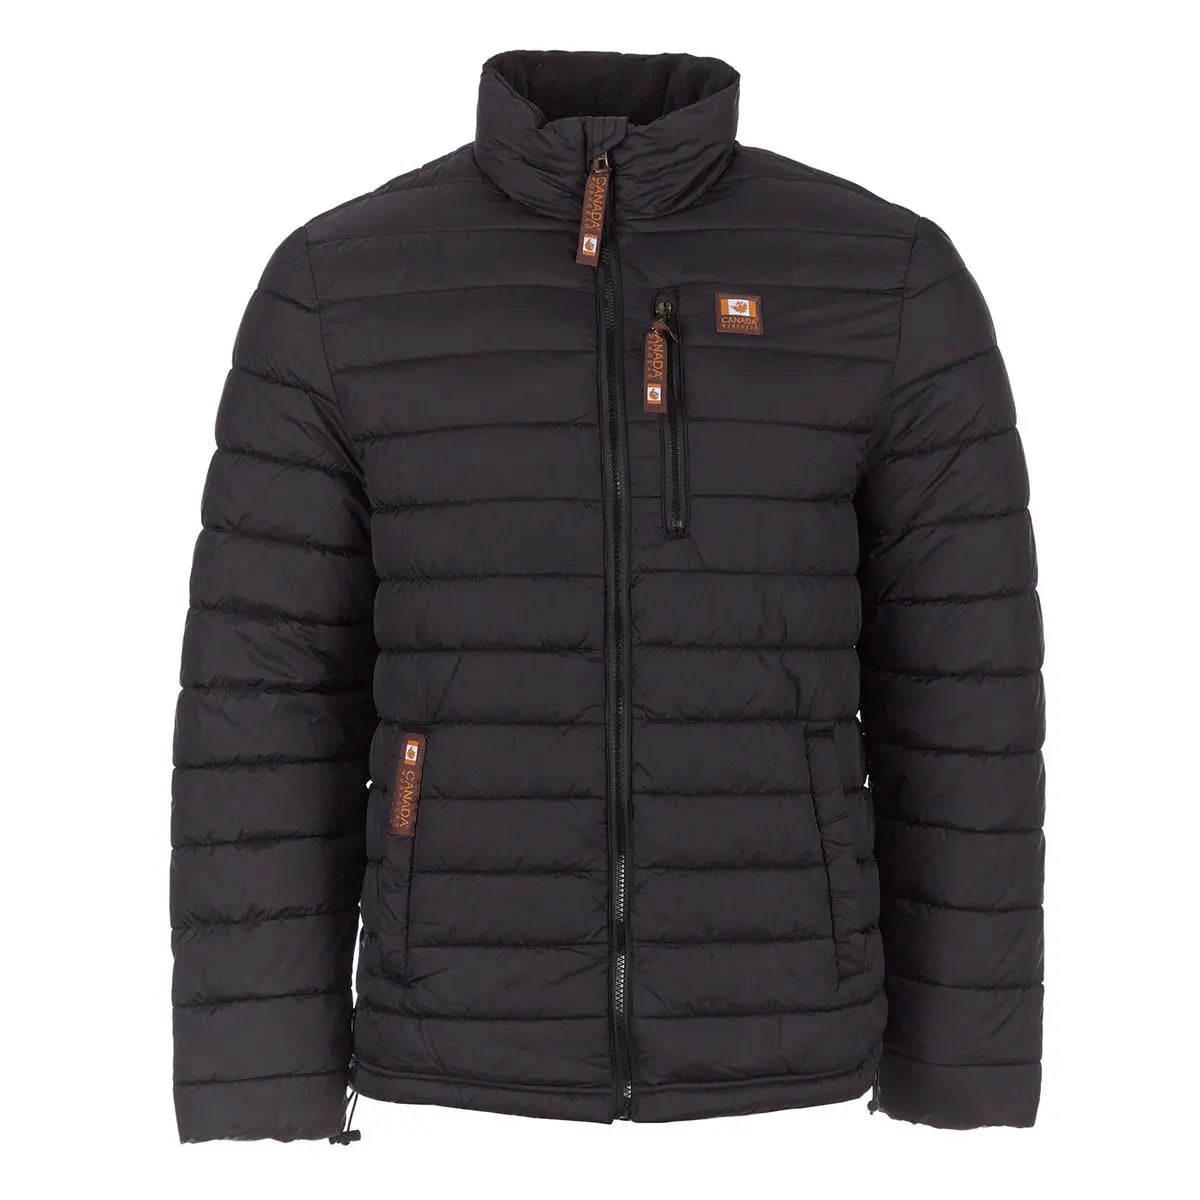 Image of Canada Weather Gear Men's Quilted Jacket